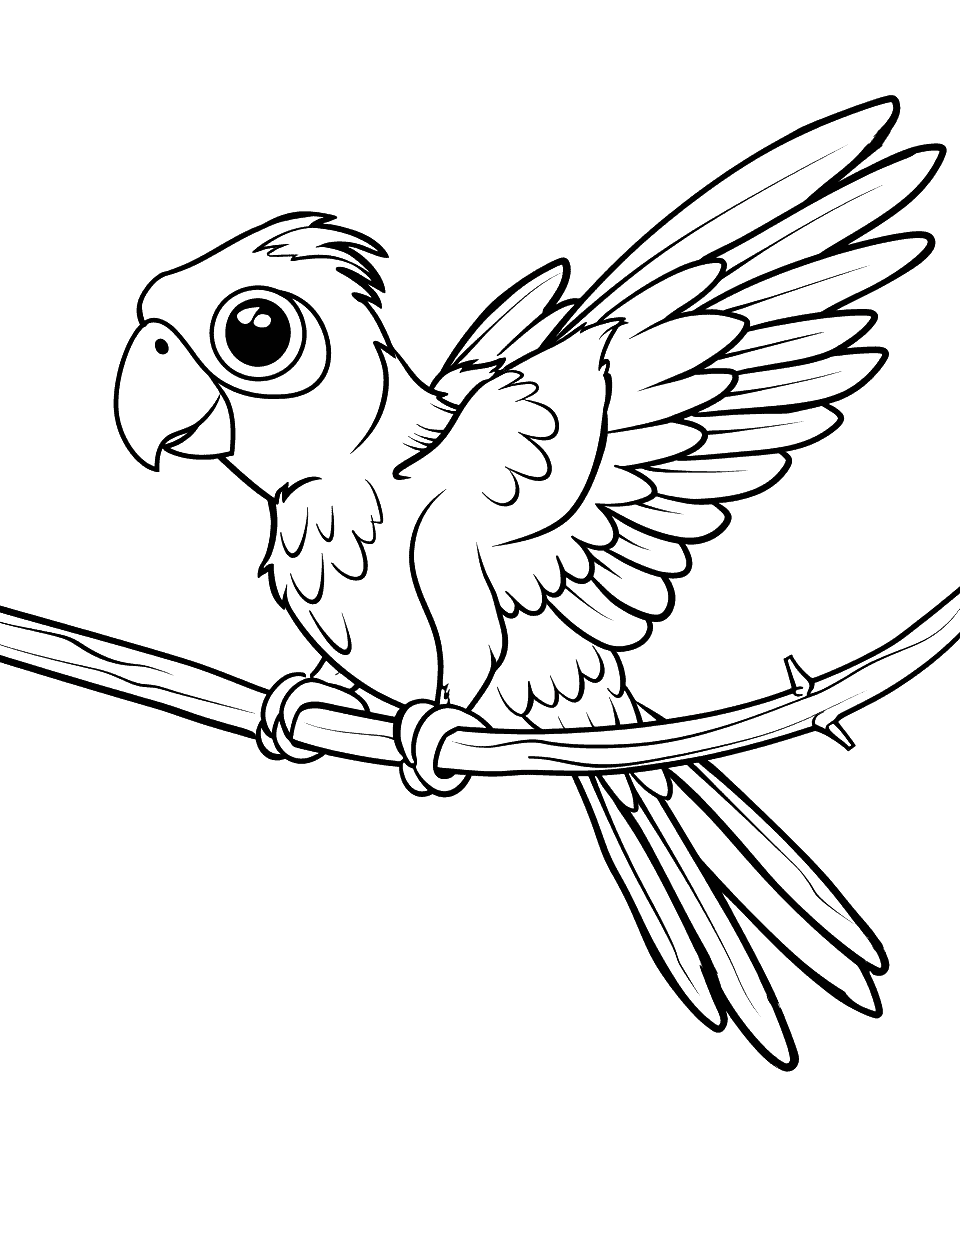 Baby Parrot’s First Flight Parrot Coloring Page - A baby parrot clumsily flapping its wings, attempting to fly.